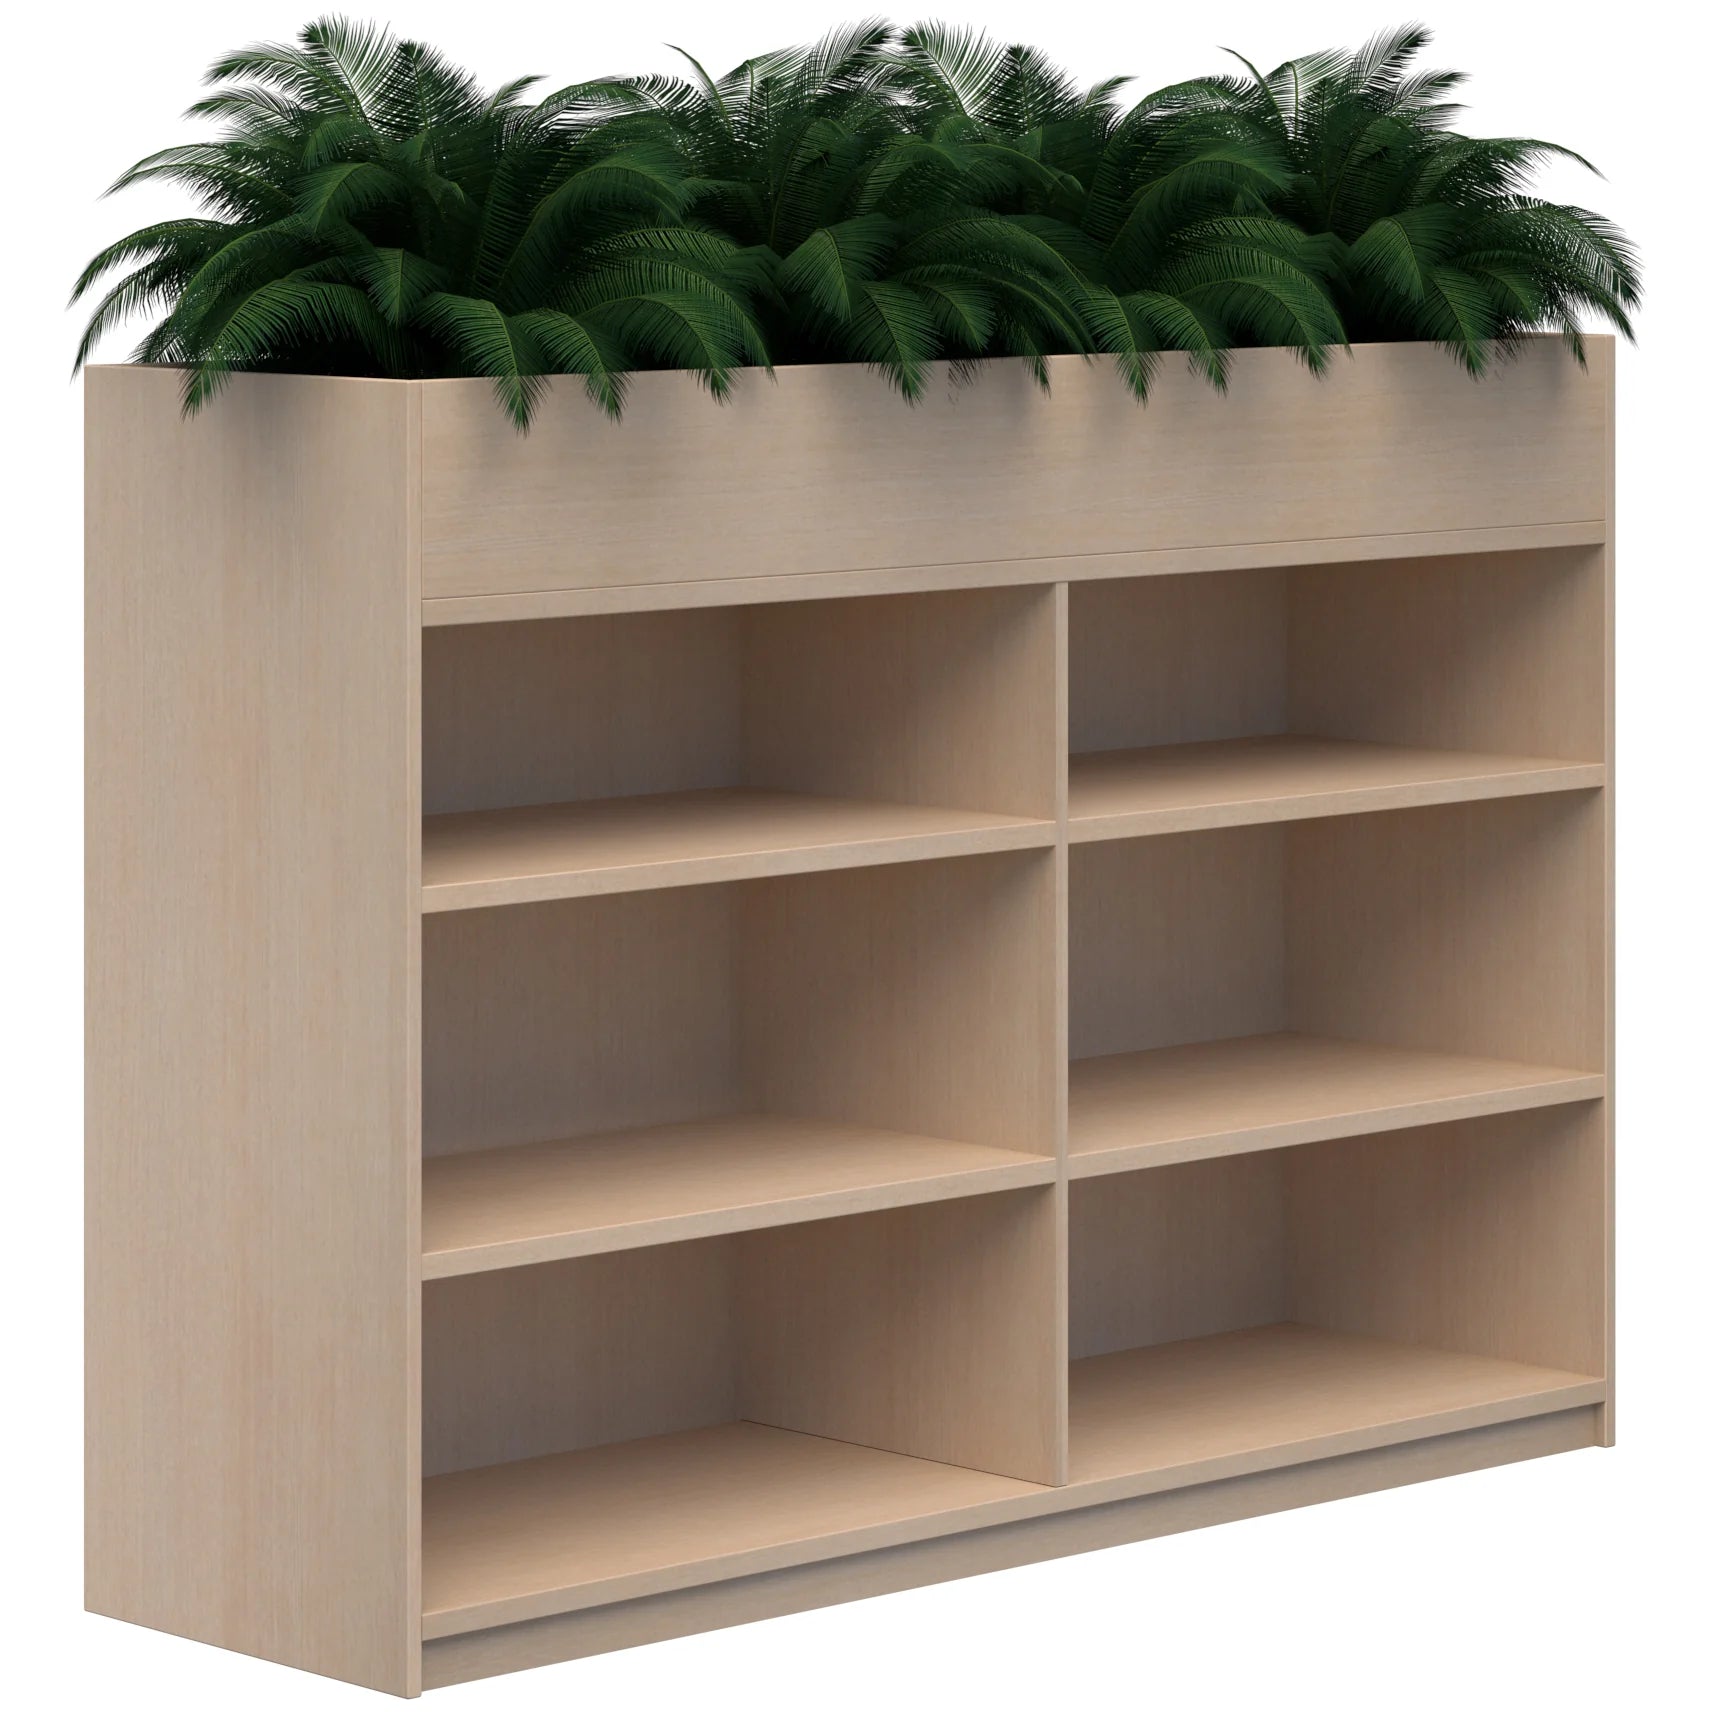 Dual three tier bookcase with built in planter box on top in refined oak colour.